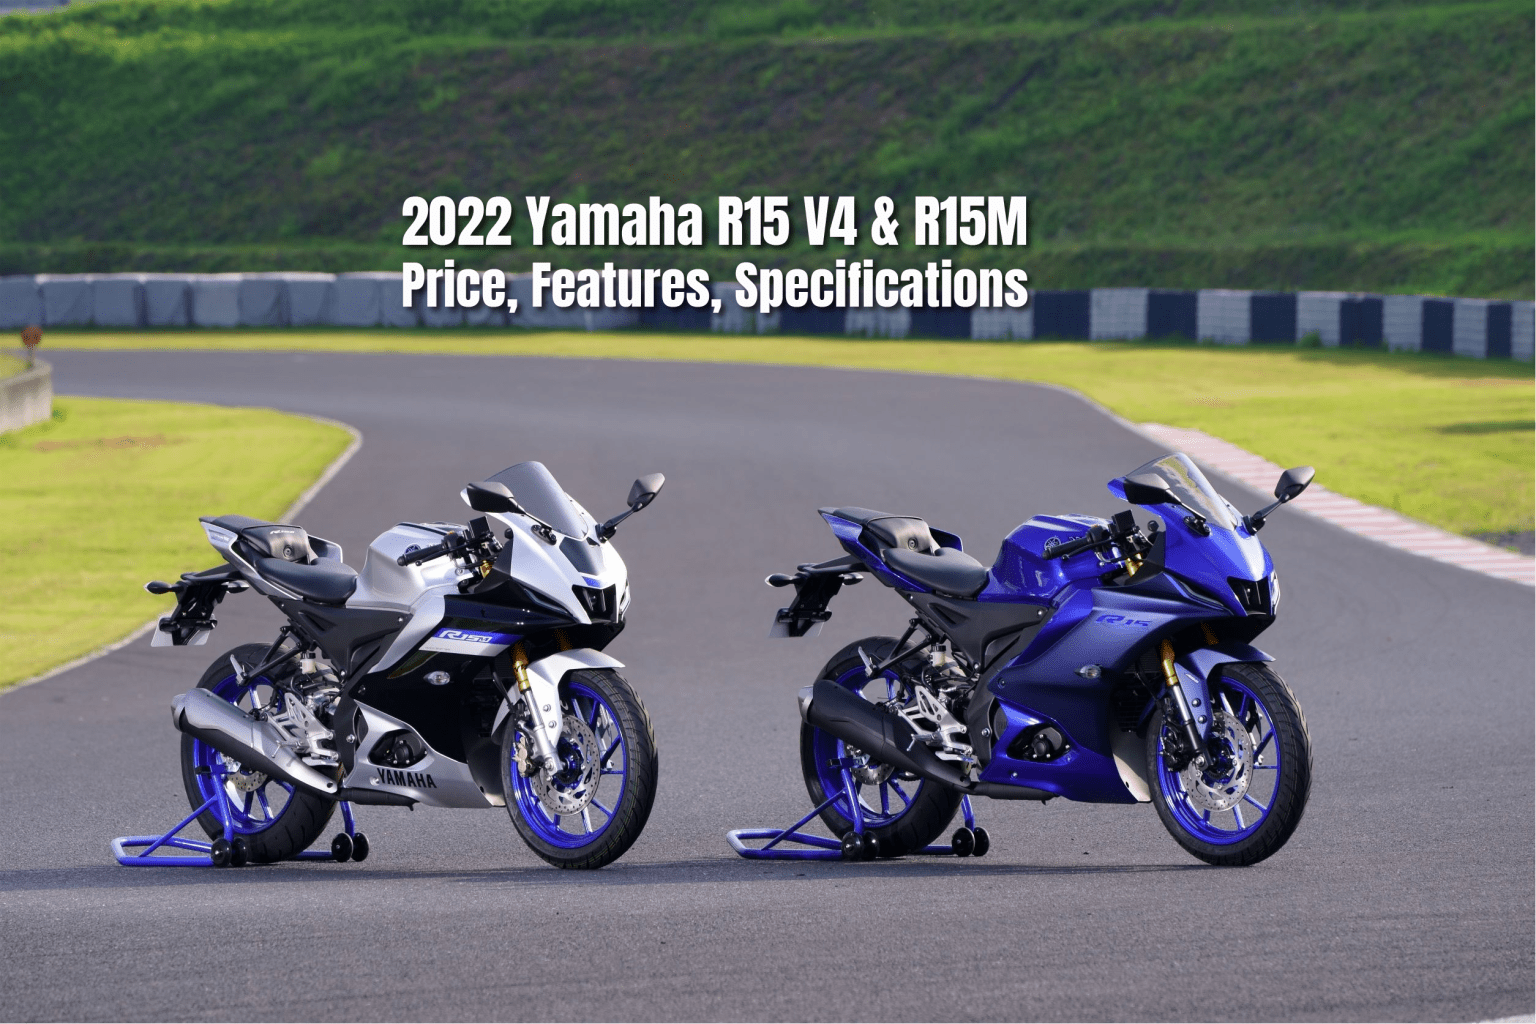 2022 Yamaha R15 V4 &amp; R15M Price, Features, Specifications